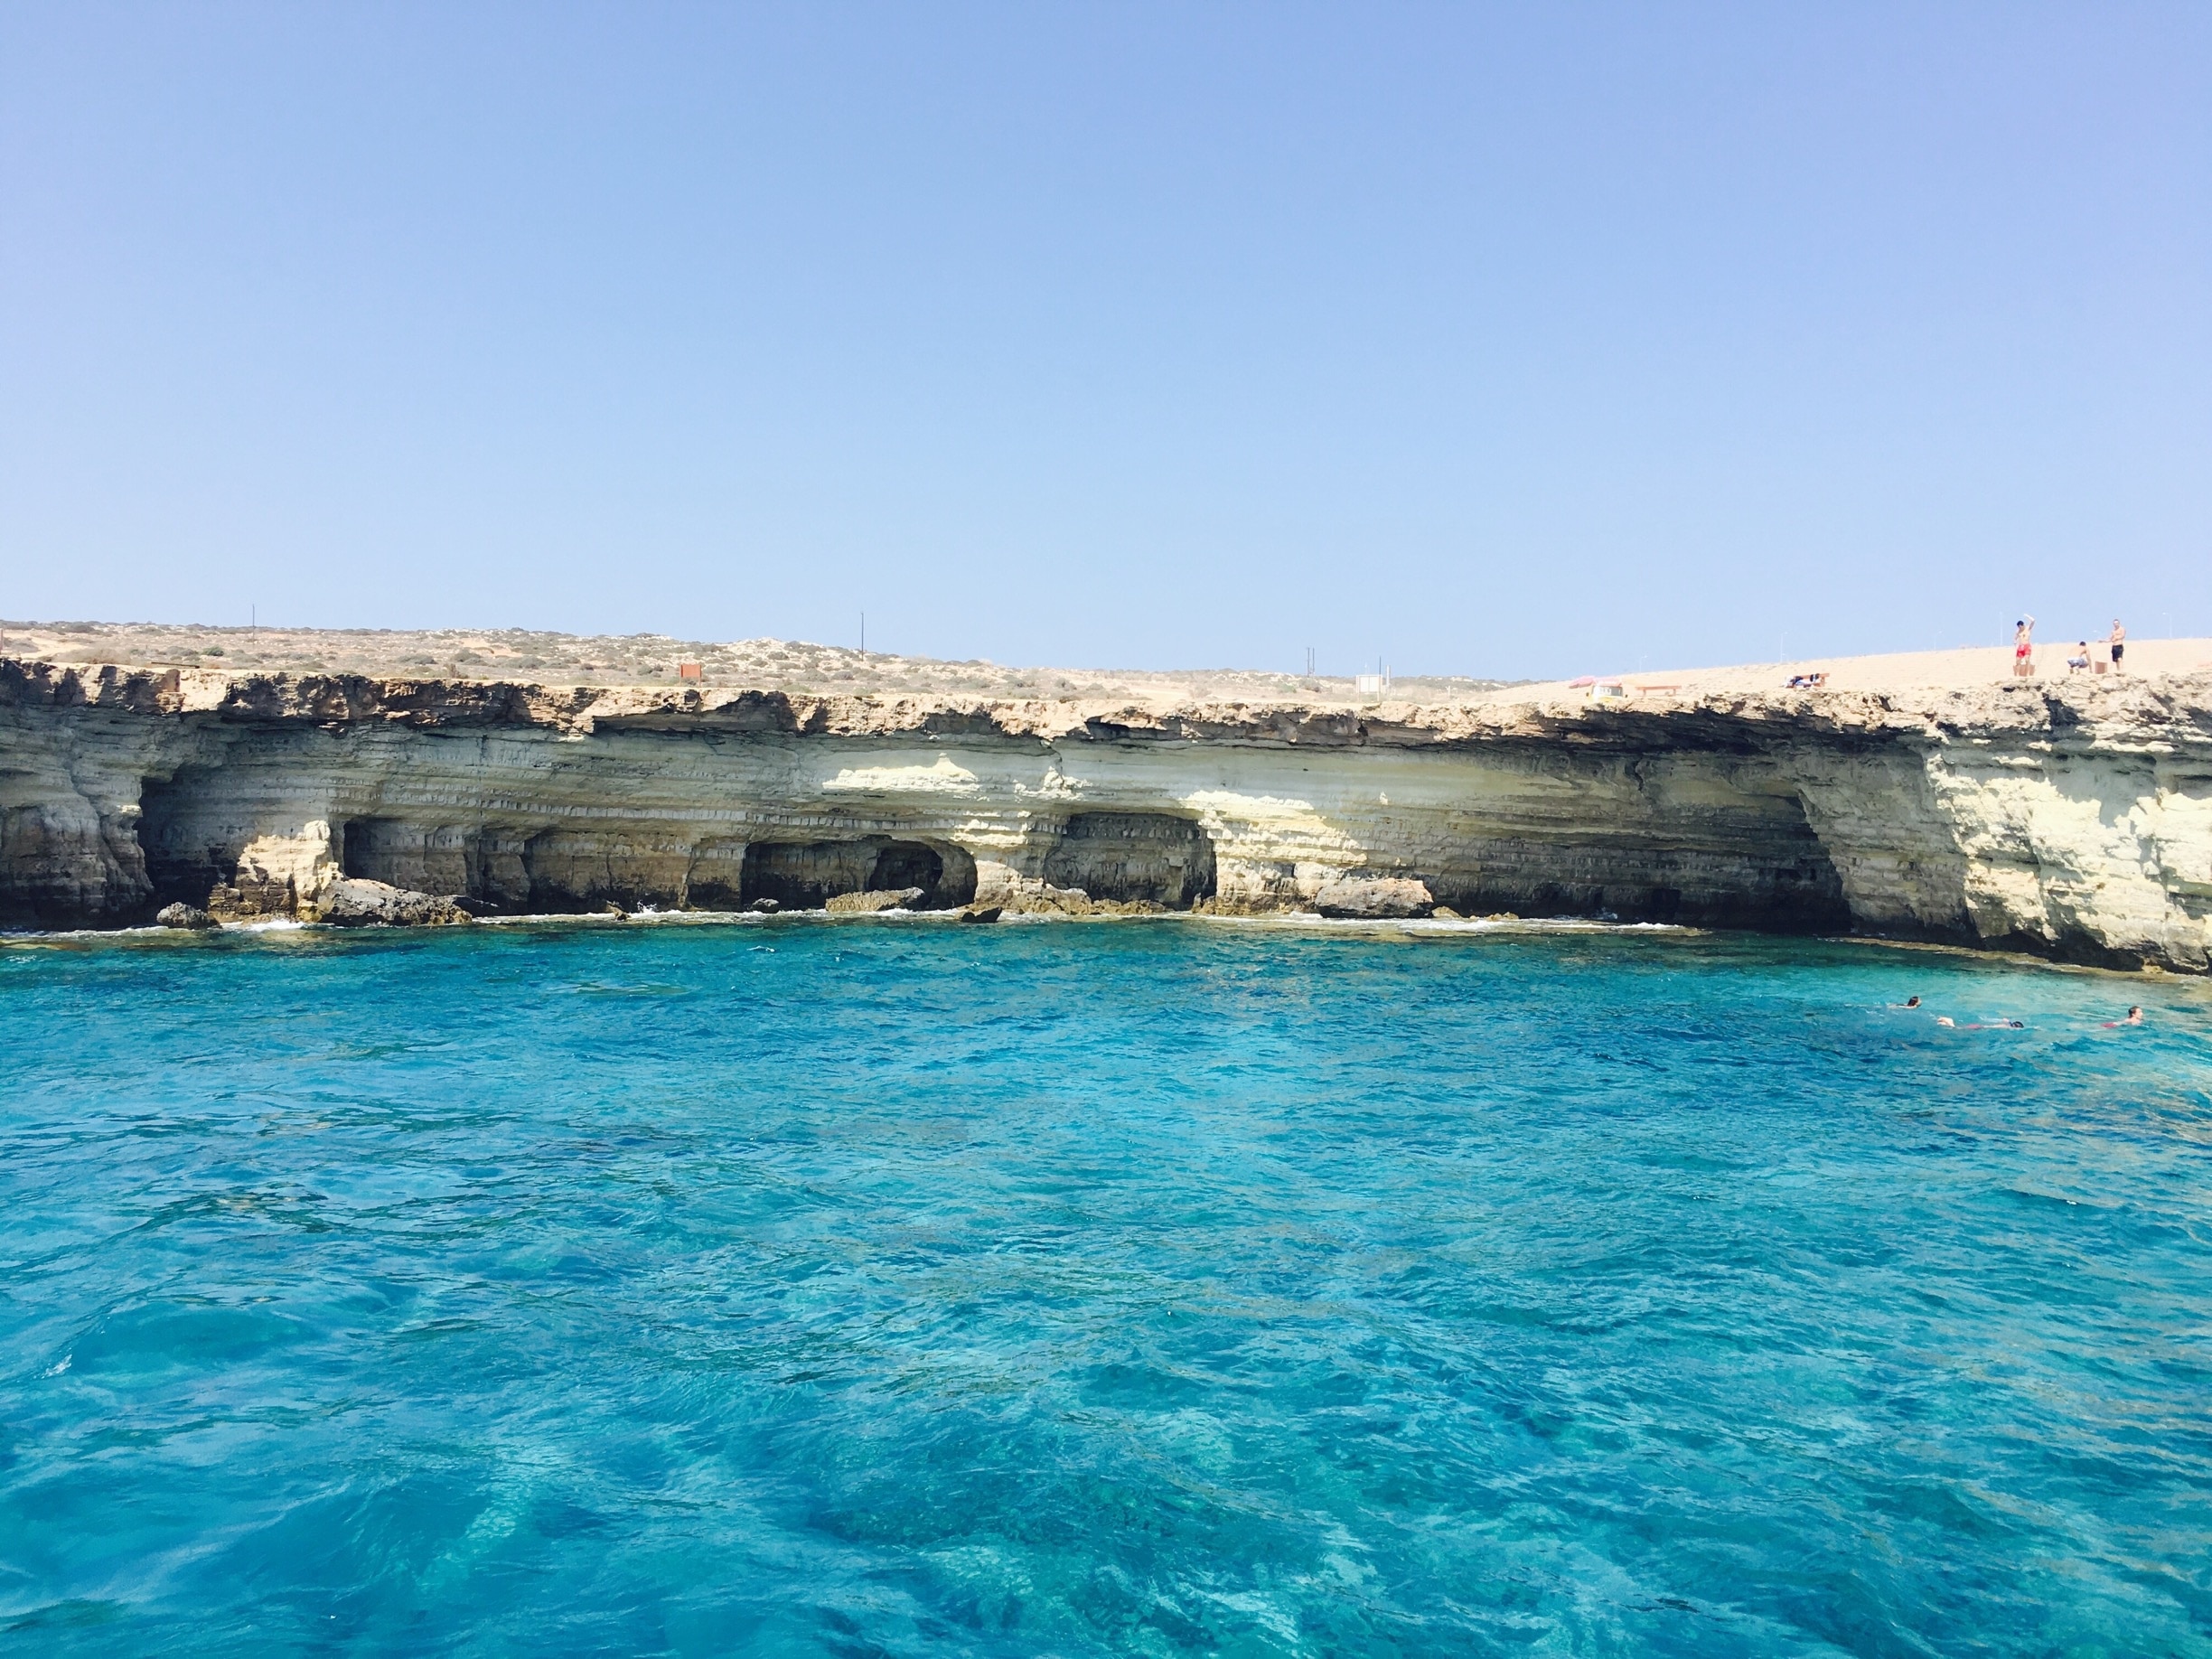 One amongst the many cliff jumping opportunities blue lagoon, Cyprus has to offer!